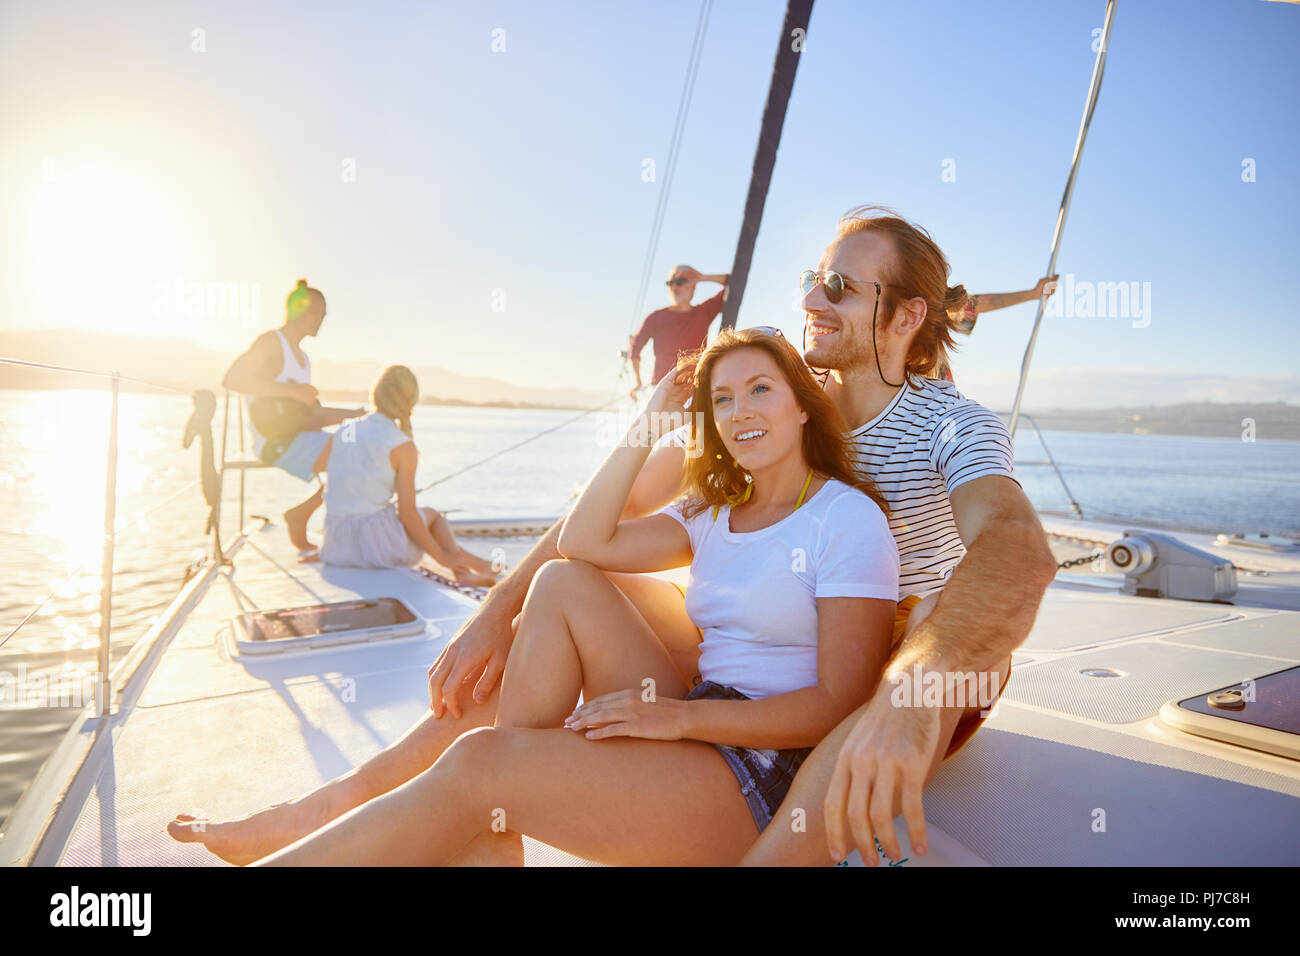 Couple relaxing on sunny boat Banque D'Images